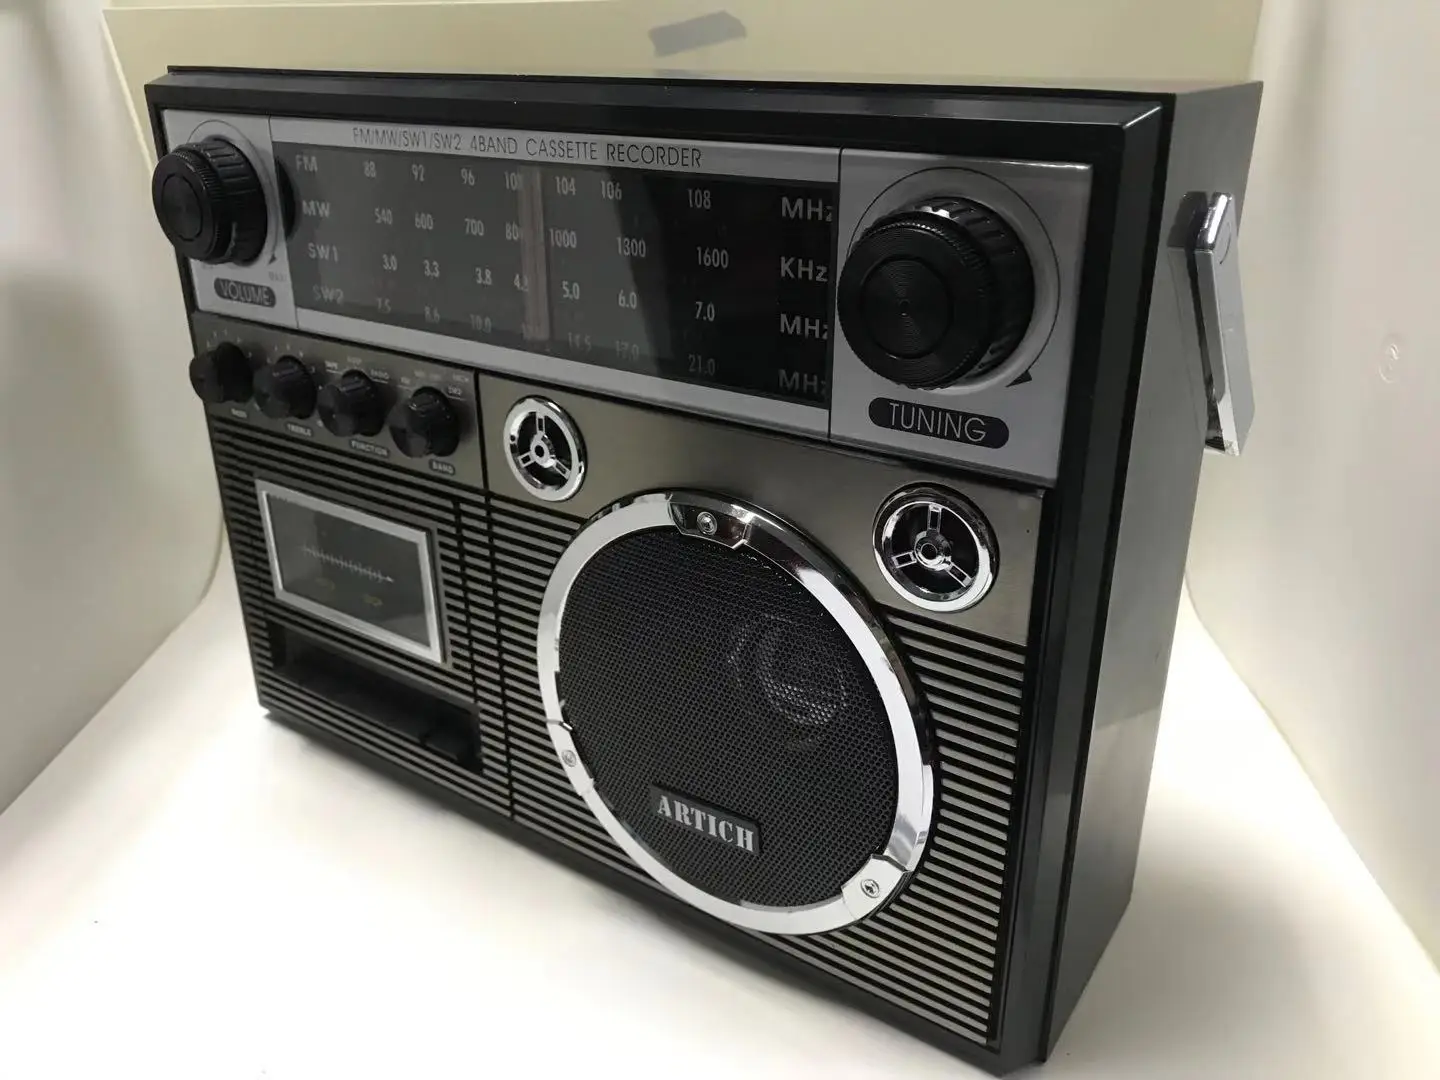 Hamson Home Used Cassette Recorder With Fm/am/sw Radio And Usb/sd ...